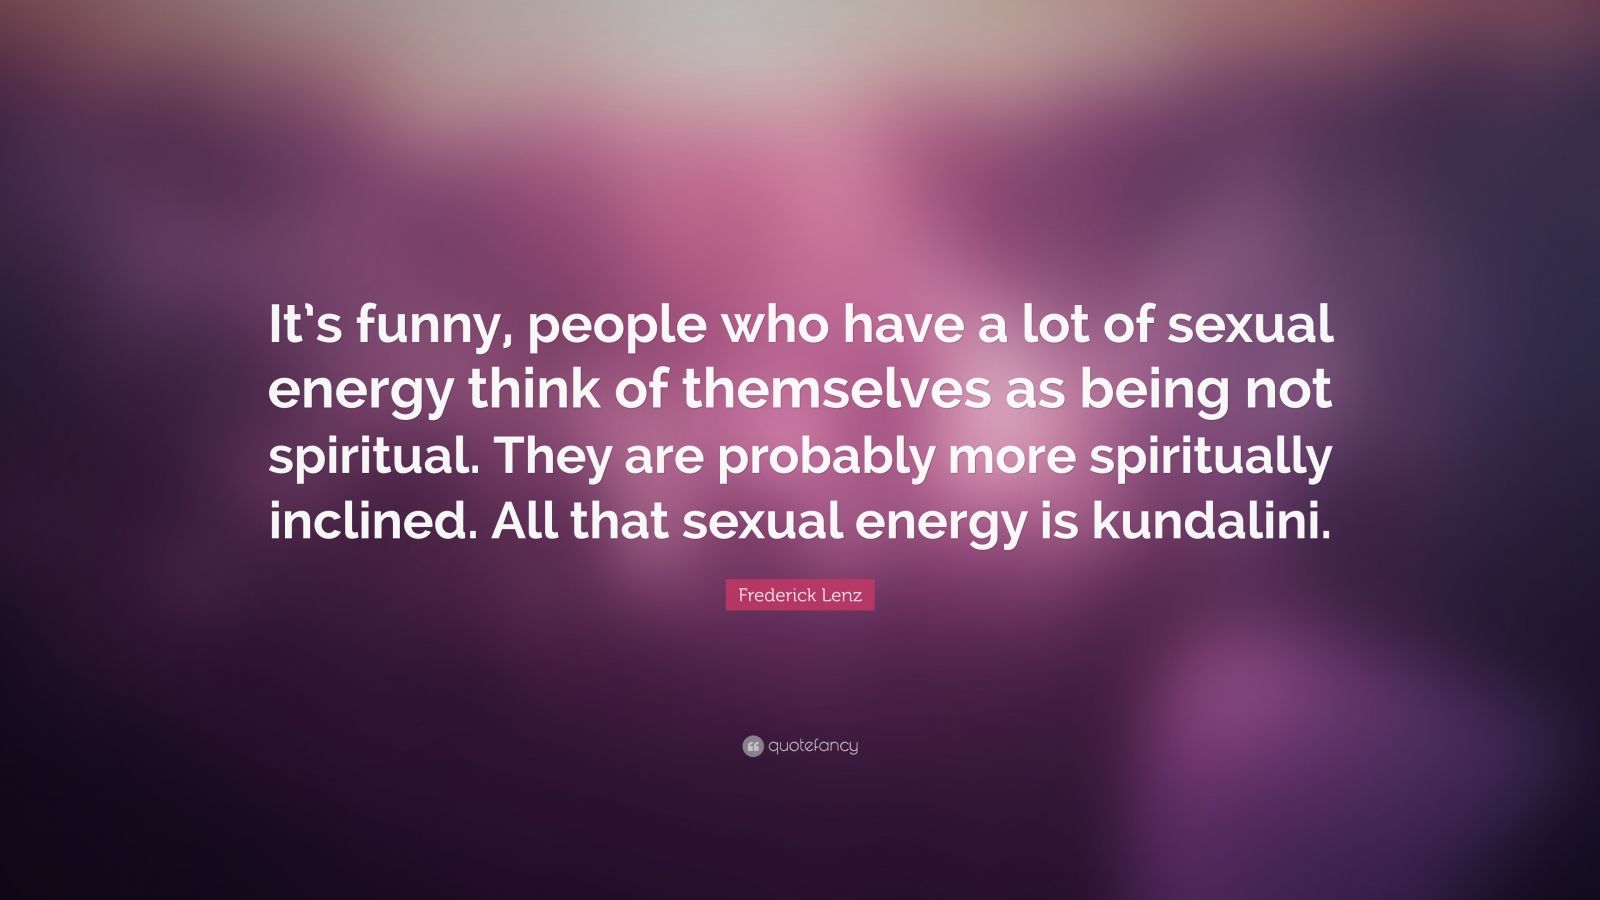 Frederick Lenz Quote: “It’s funny, people who have a lot of sexual